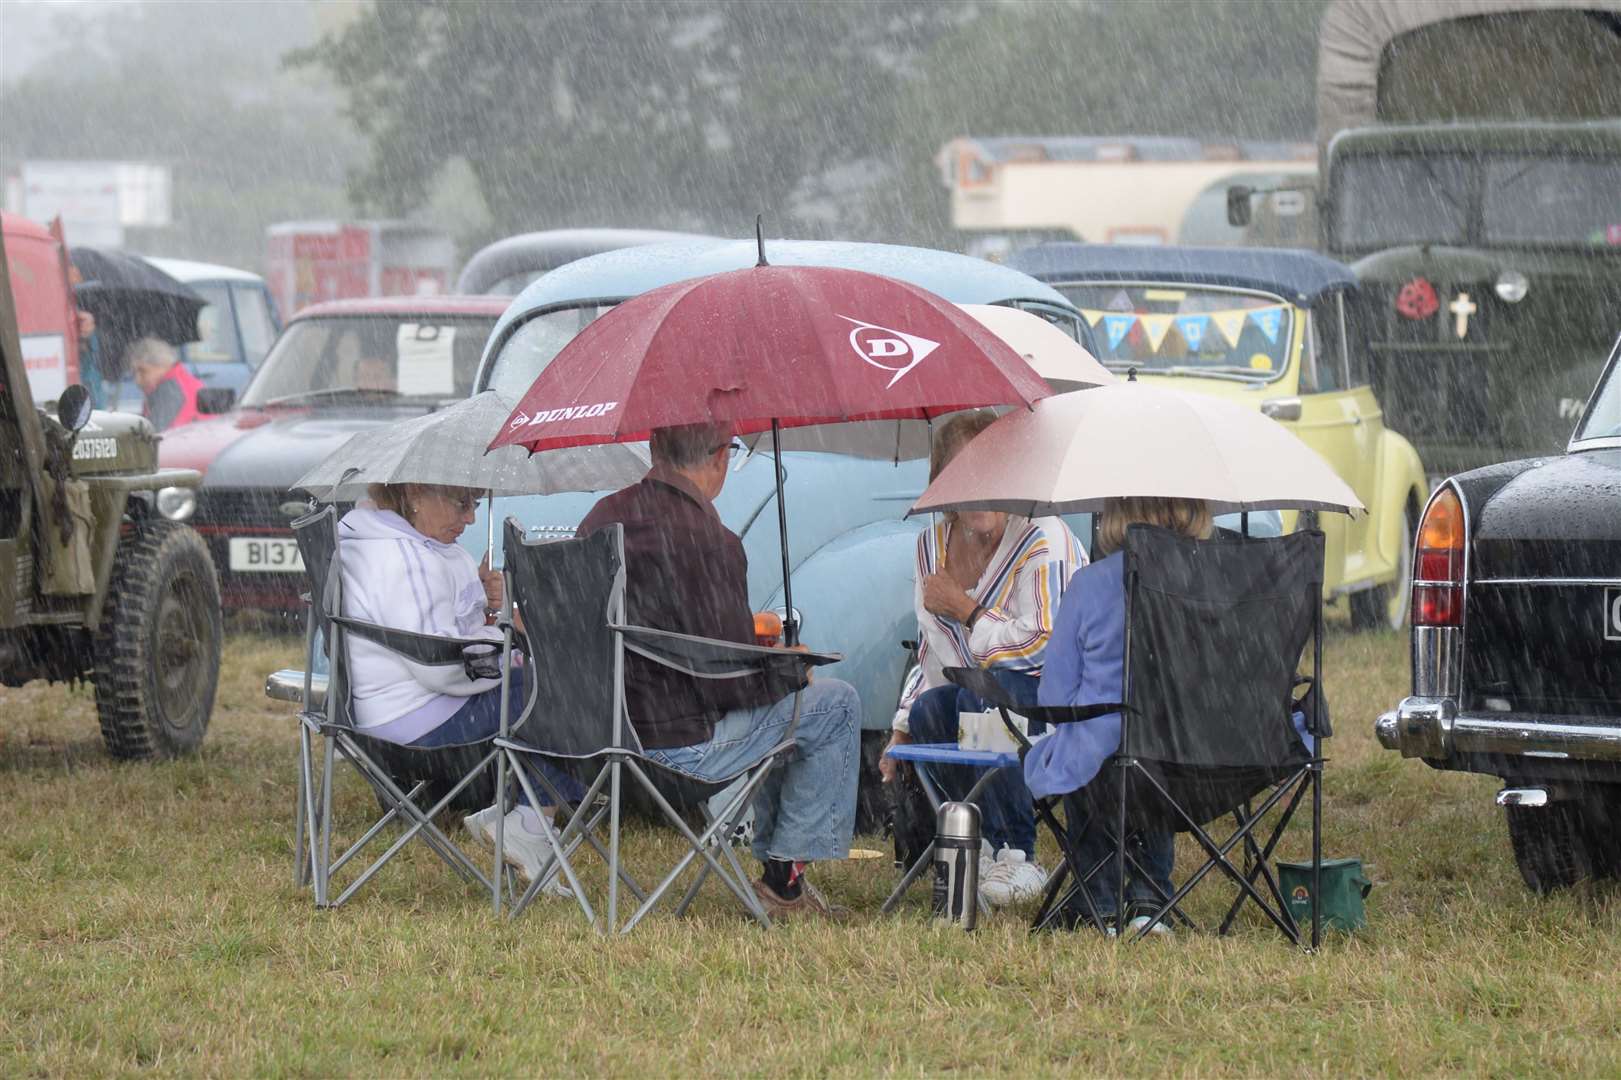 Then the rain came, a heavy shower at the Biddenden Tractorfest. Picture: Chris Davey.